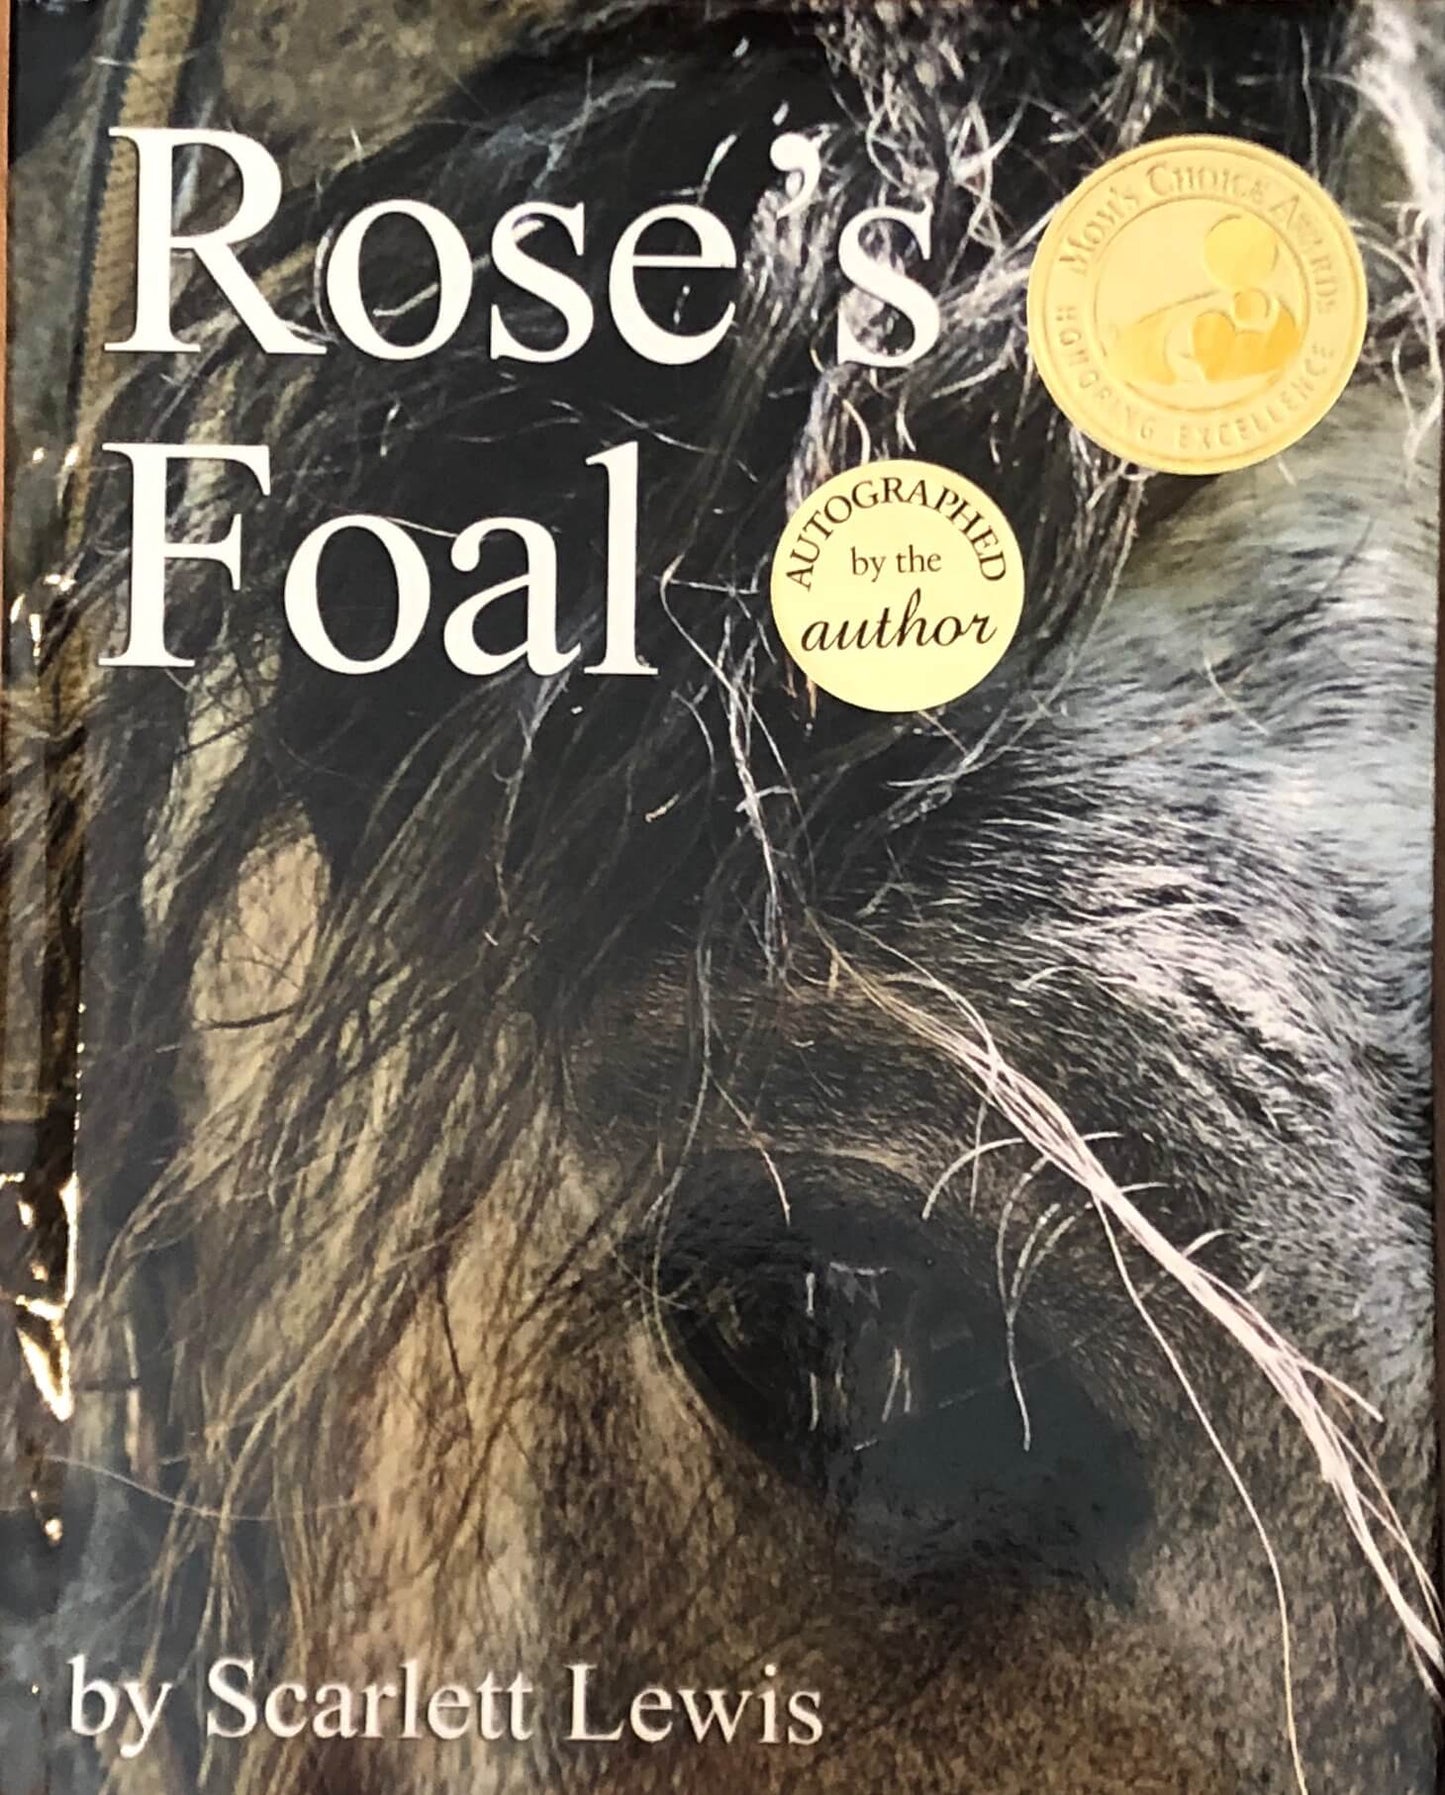 Rose's Foal (Hardcover) - SIGNED